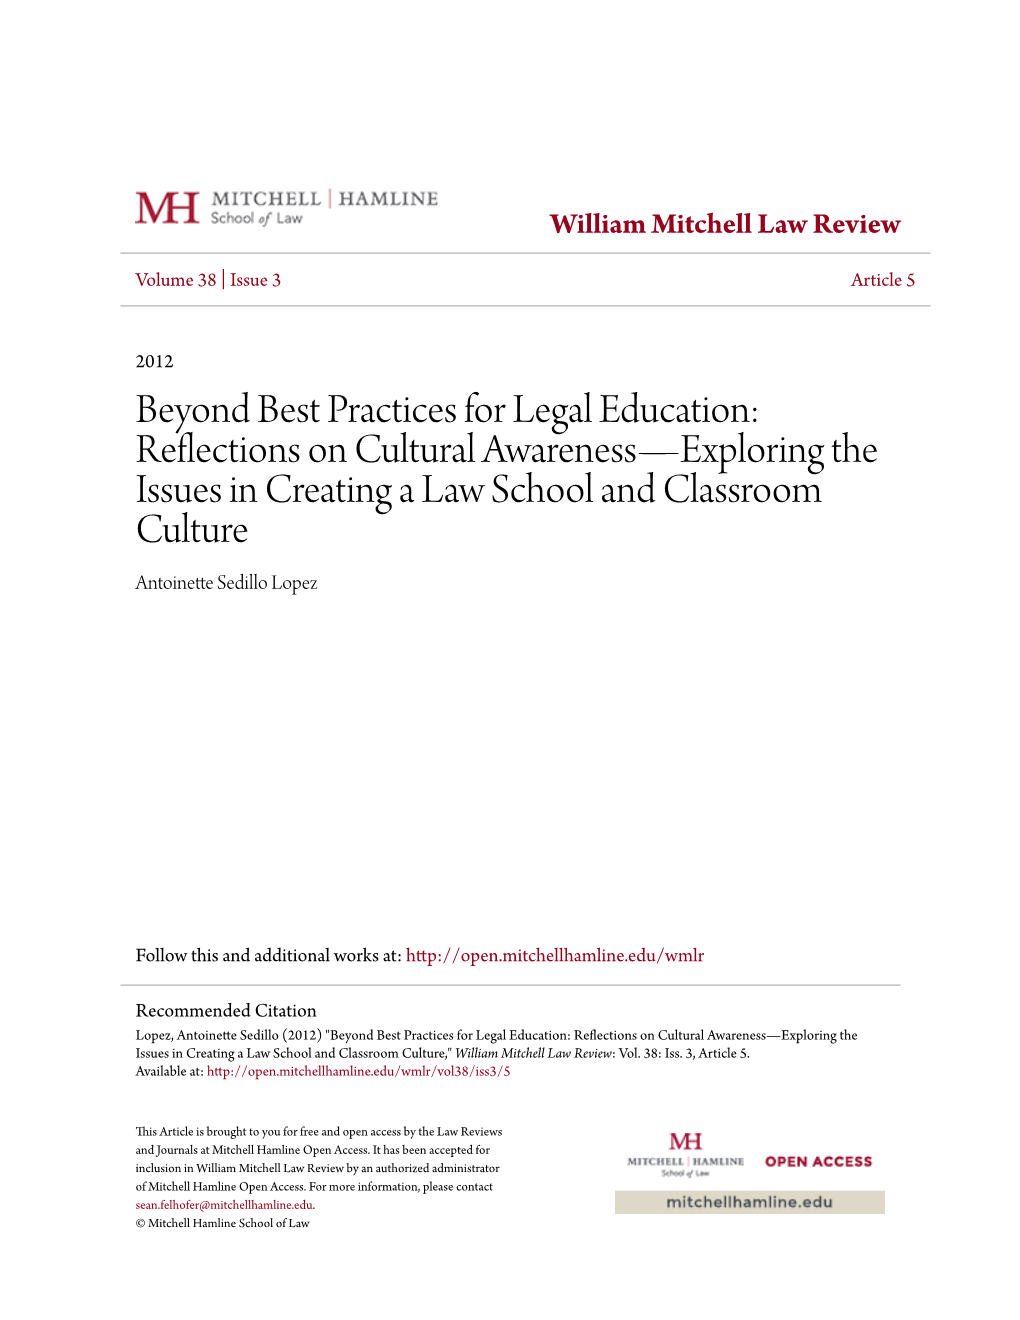 Reflections on Cultural Awareness—Exploring the Issues in Creating a Law School and Classroom Culture Antoinette Sedillo Lopez